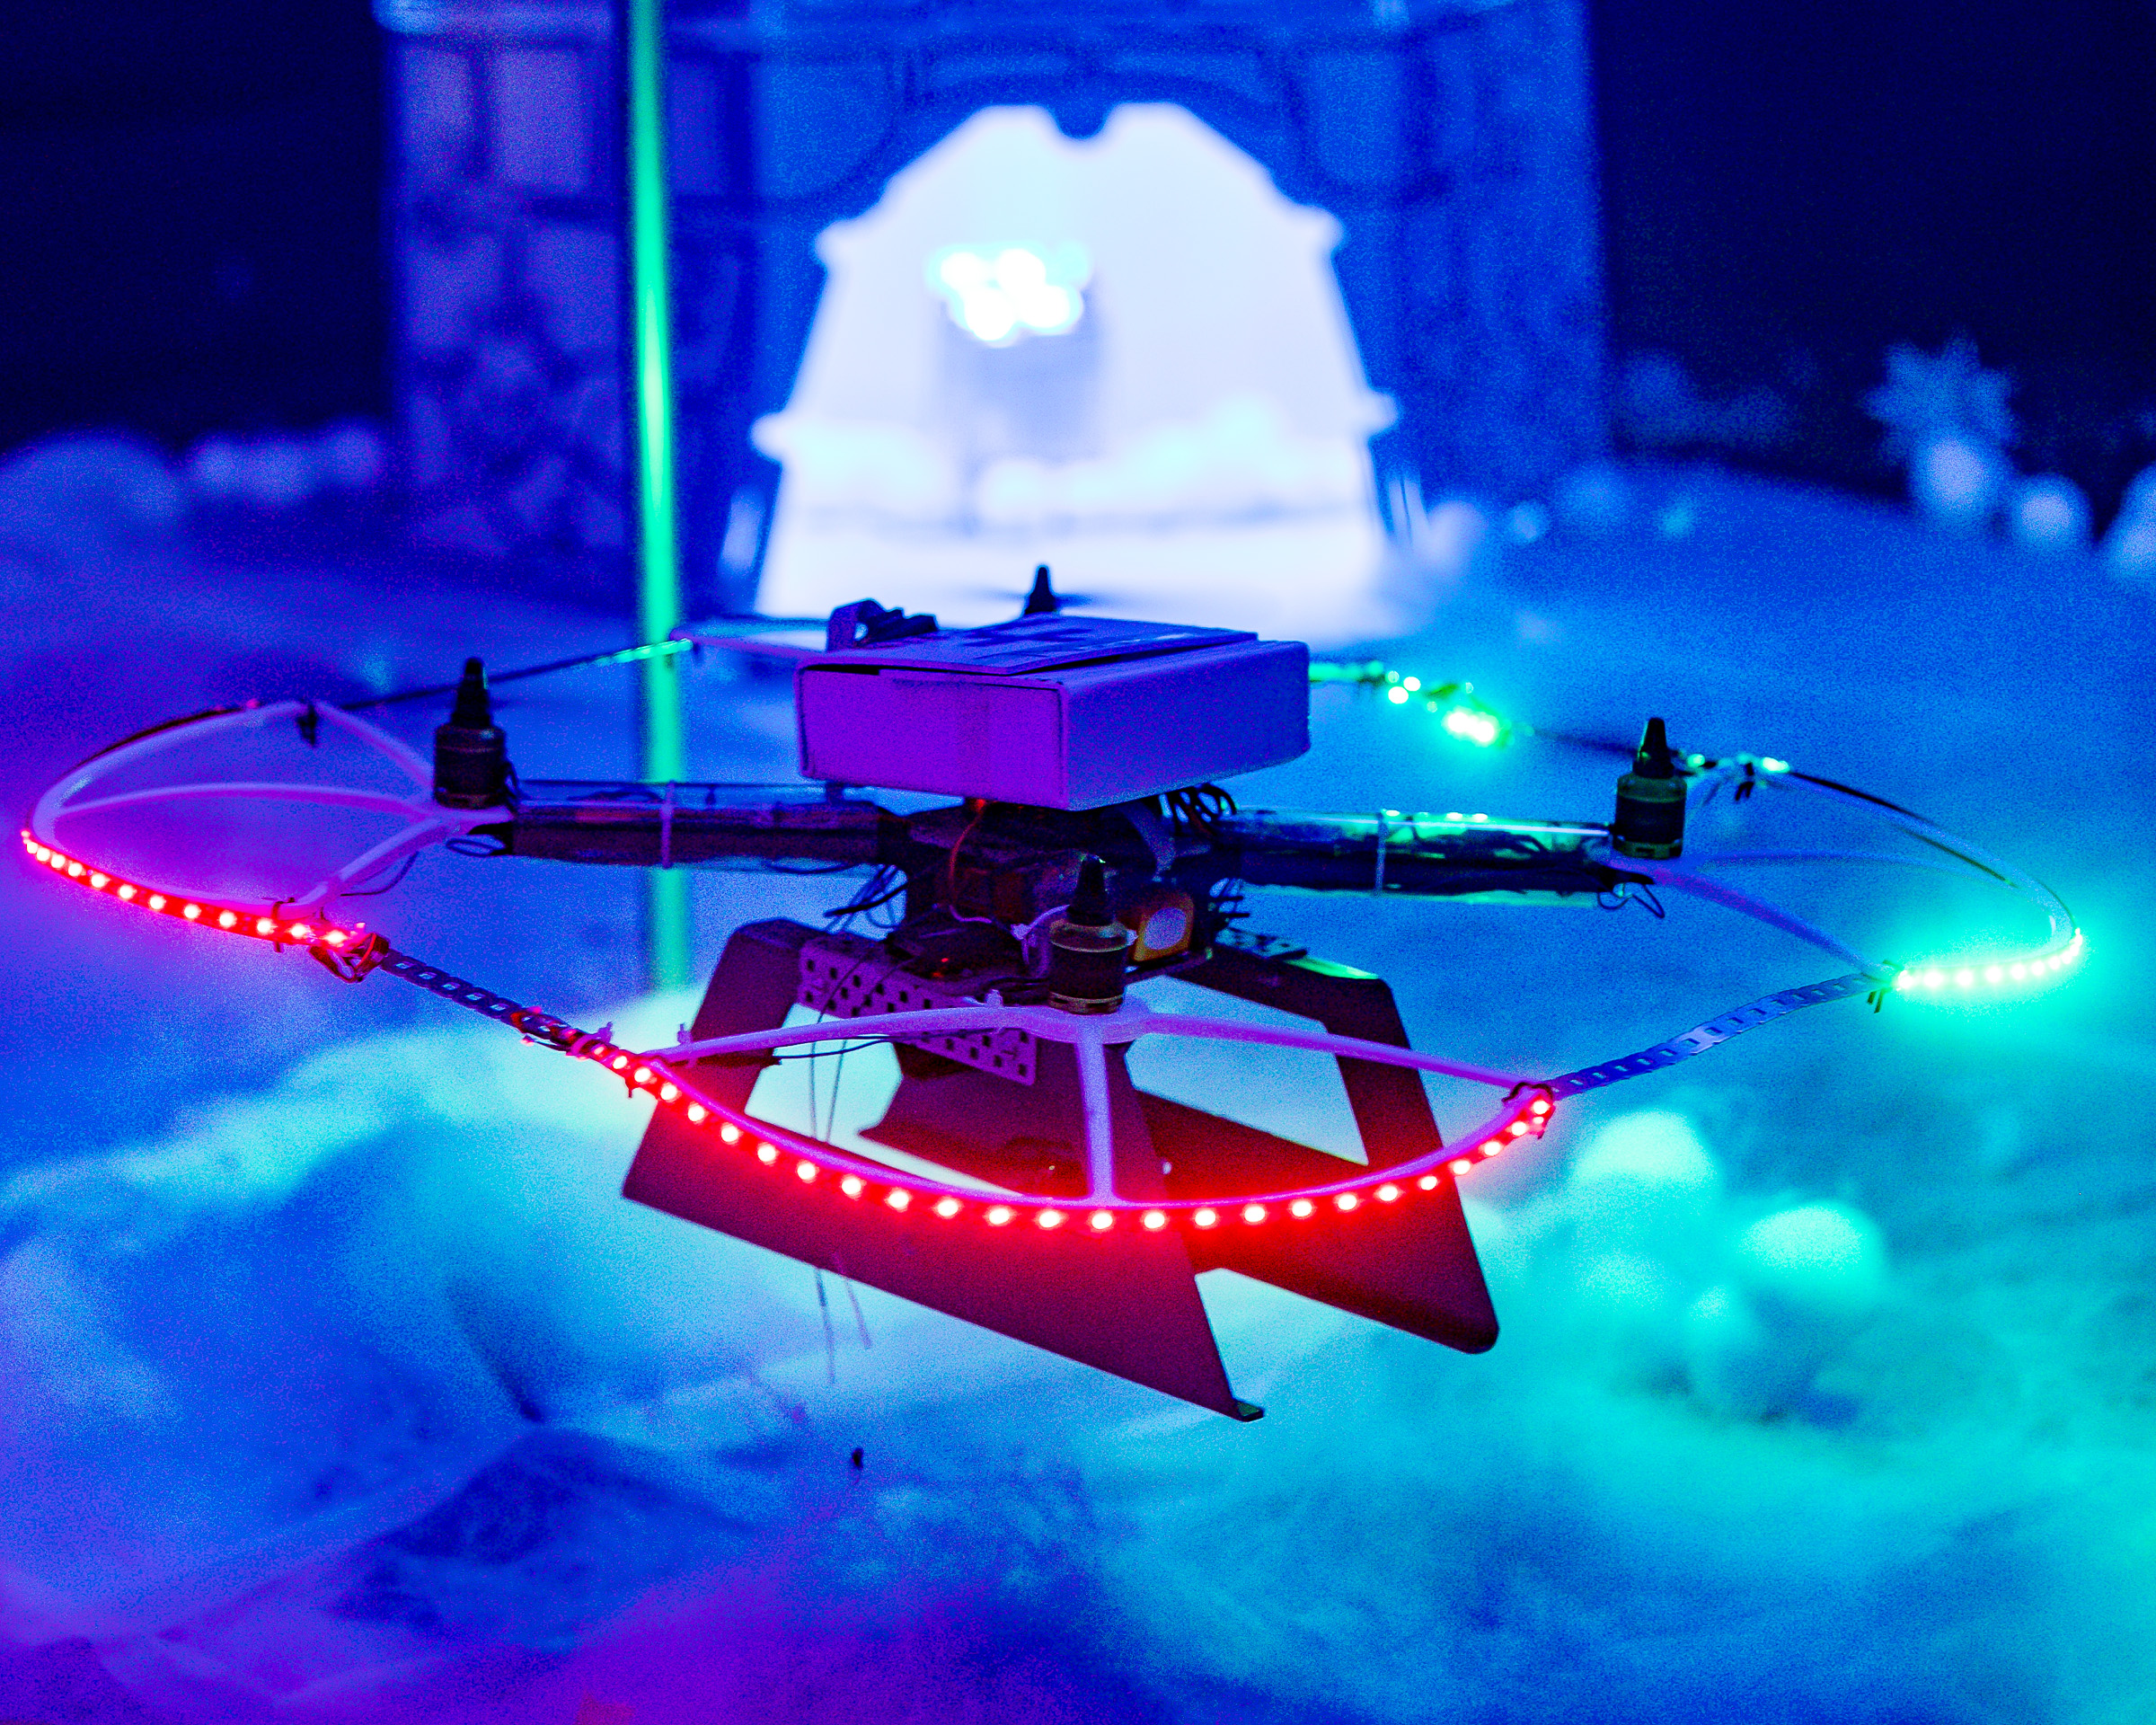 Image shows a quadcopter model with LED lights and smoke.